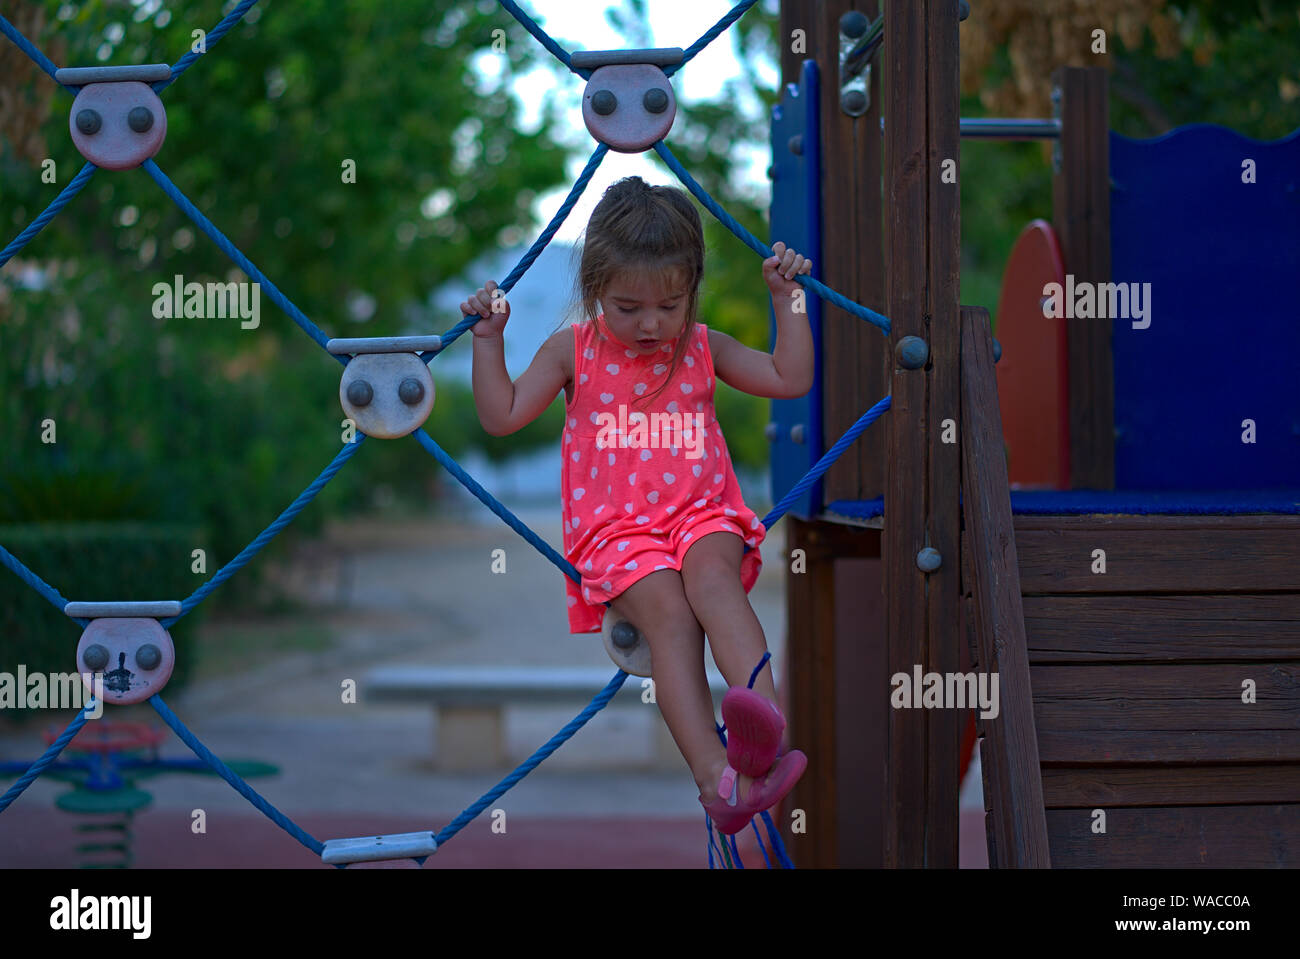 girl hanging on a net of a playground Stock Photo